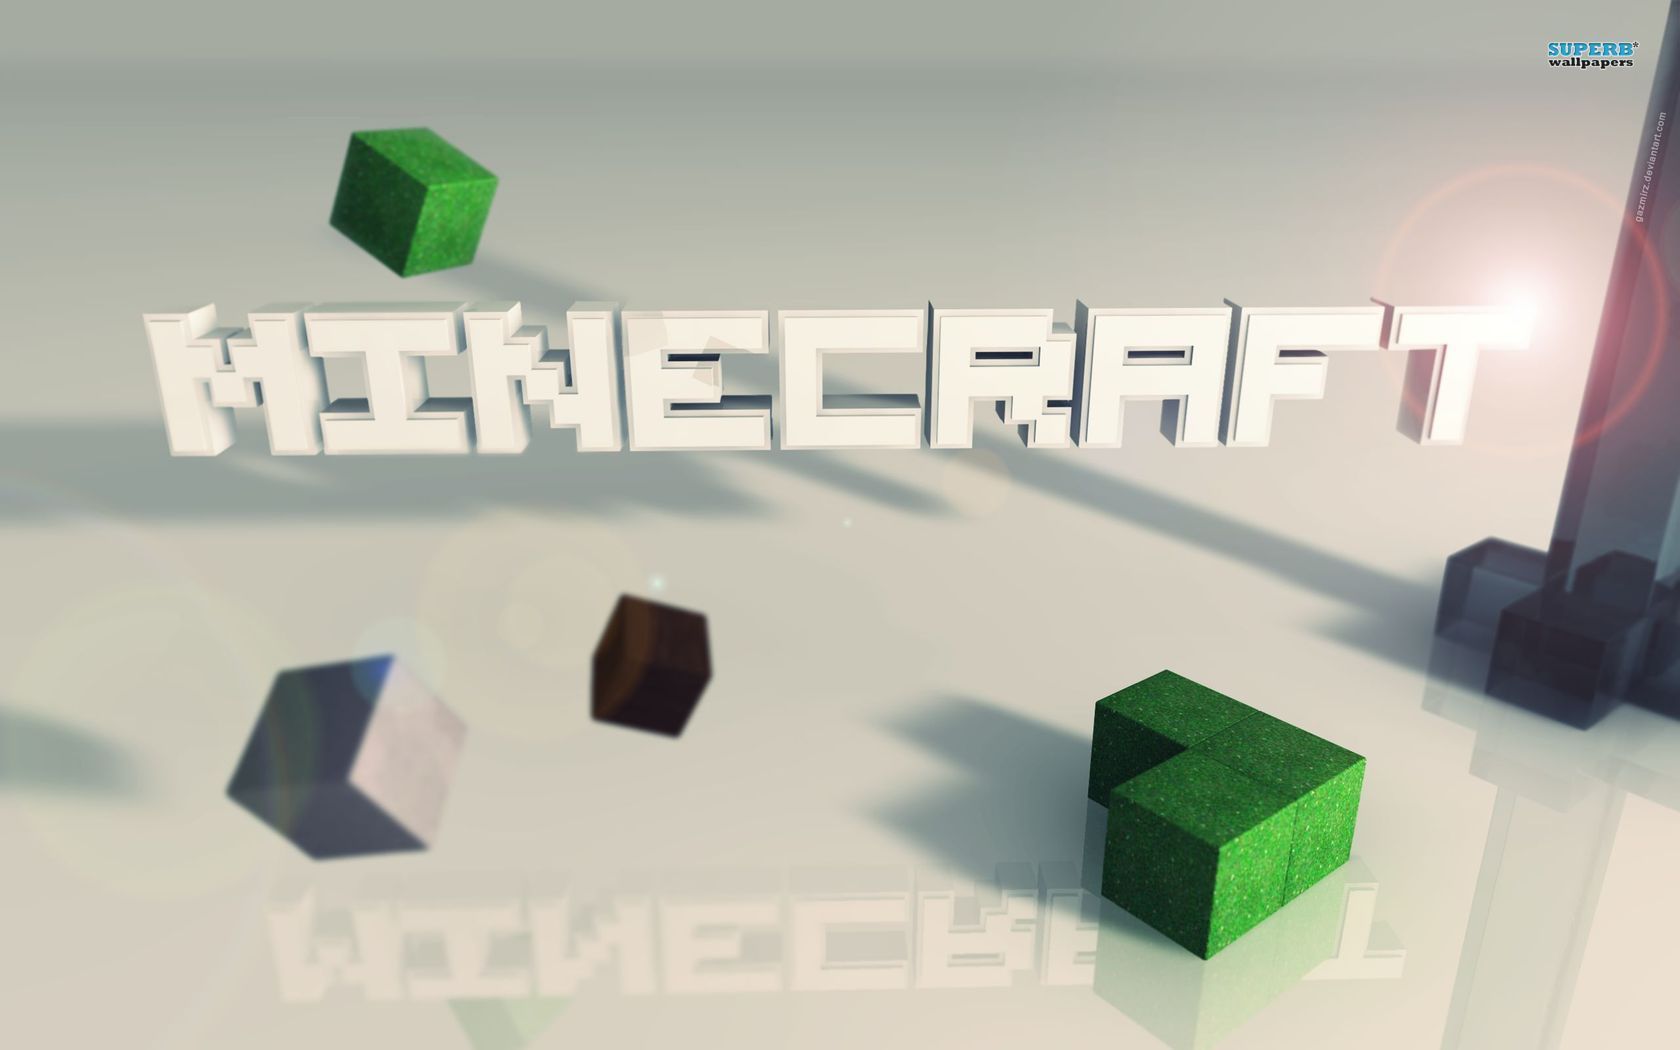 Minecraft wallpaper - Game wallpapers - #8274